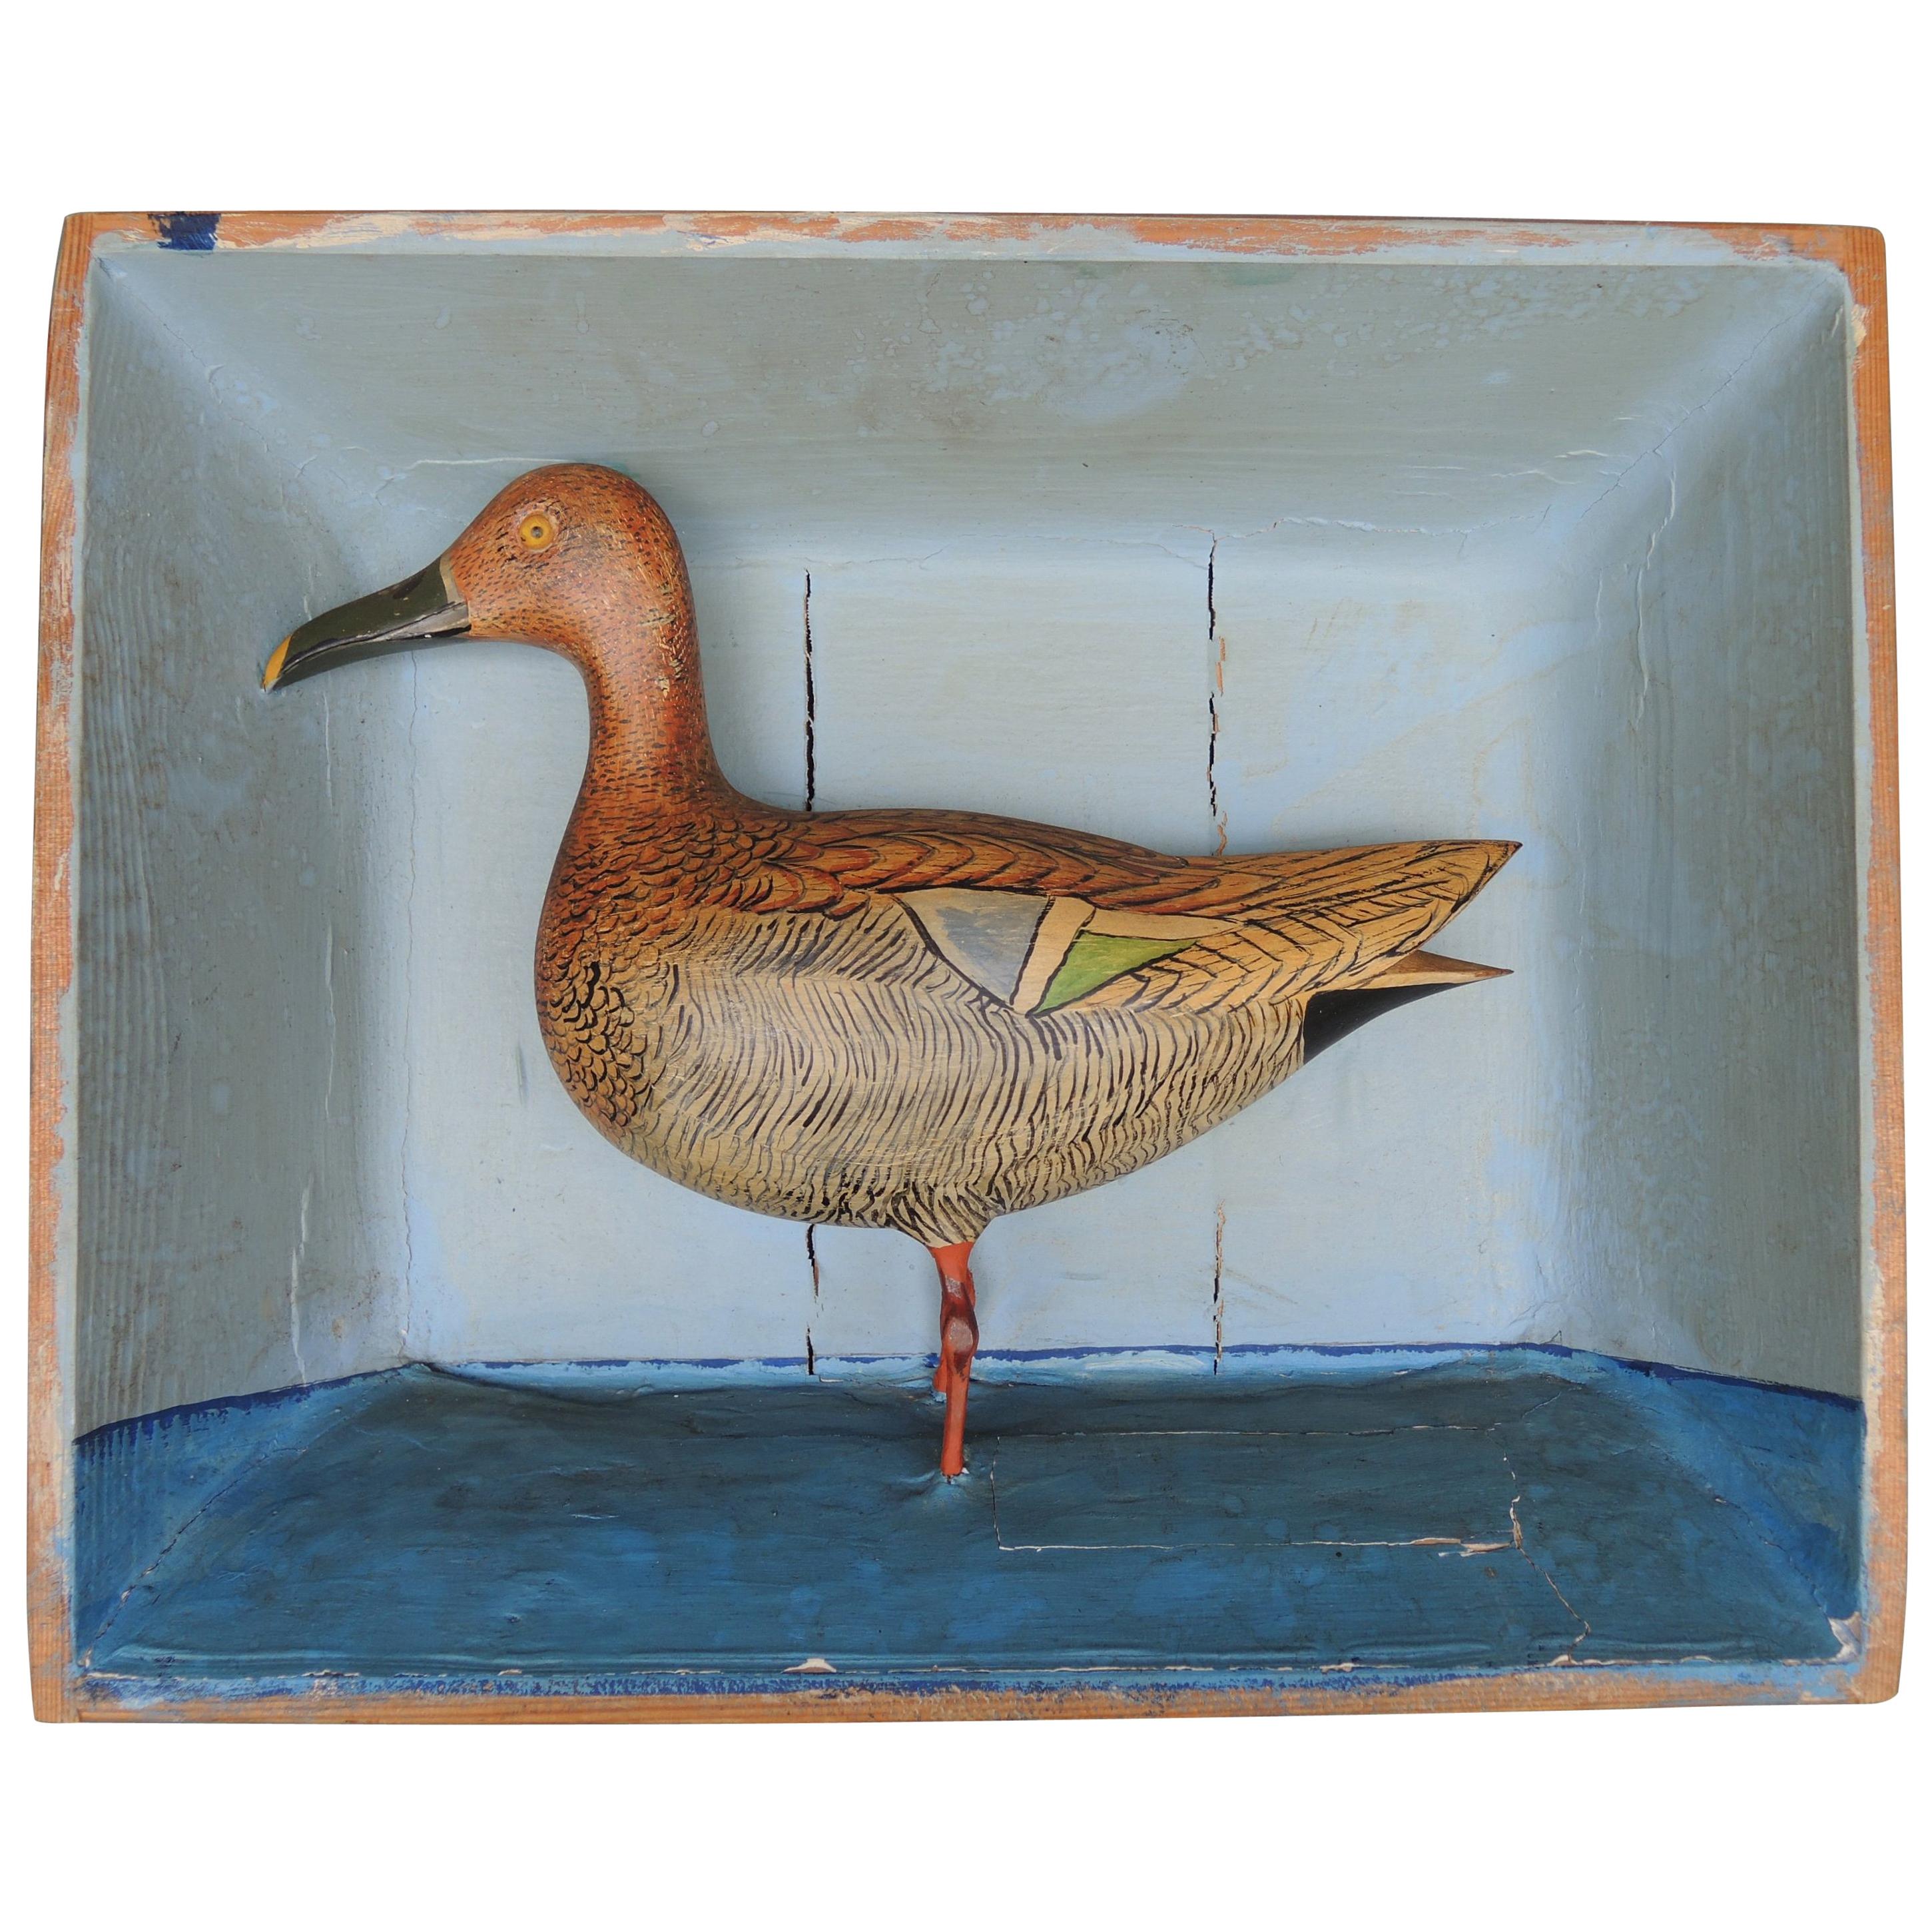 Swedish Shadow Box Diorama with a Hand Carved and Painted Wood Shore Bird